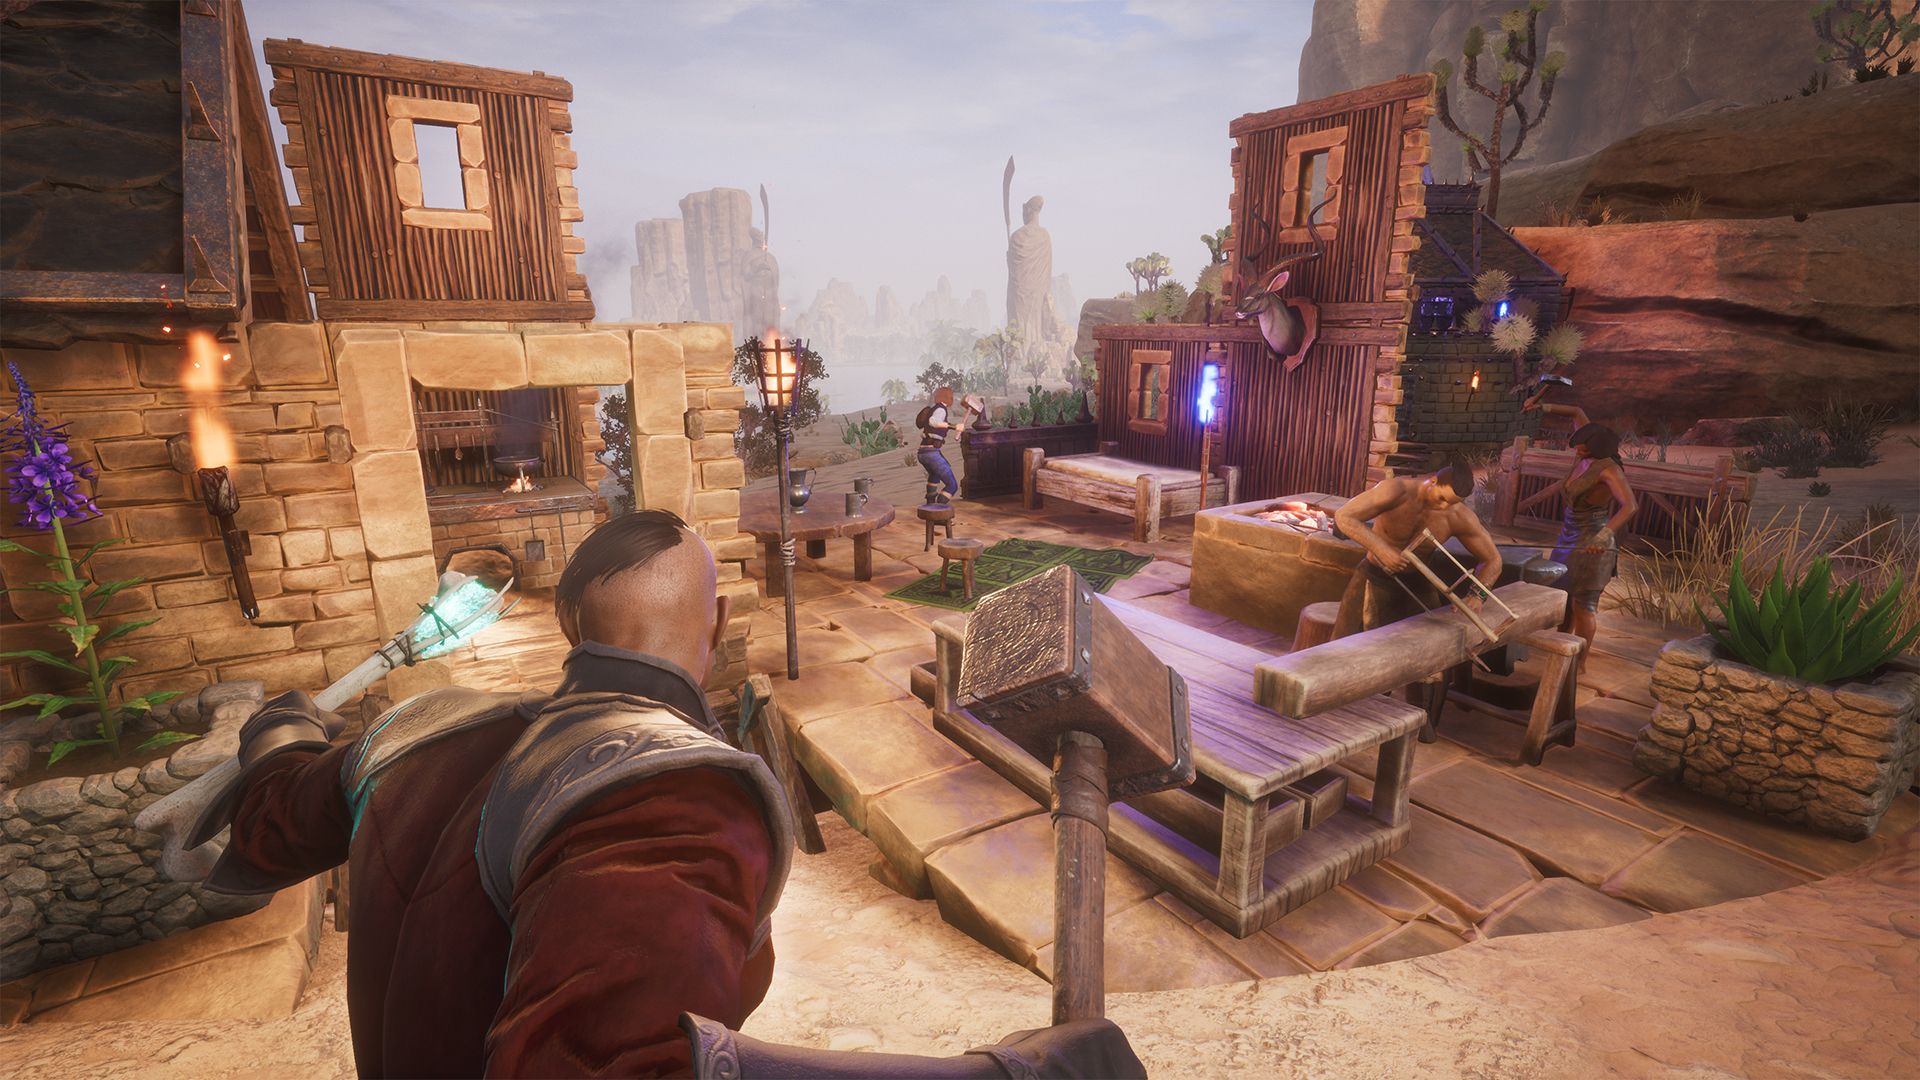 Conan Exiles Struggles With Unmoderated Griefing And Racism